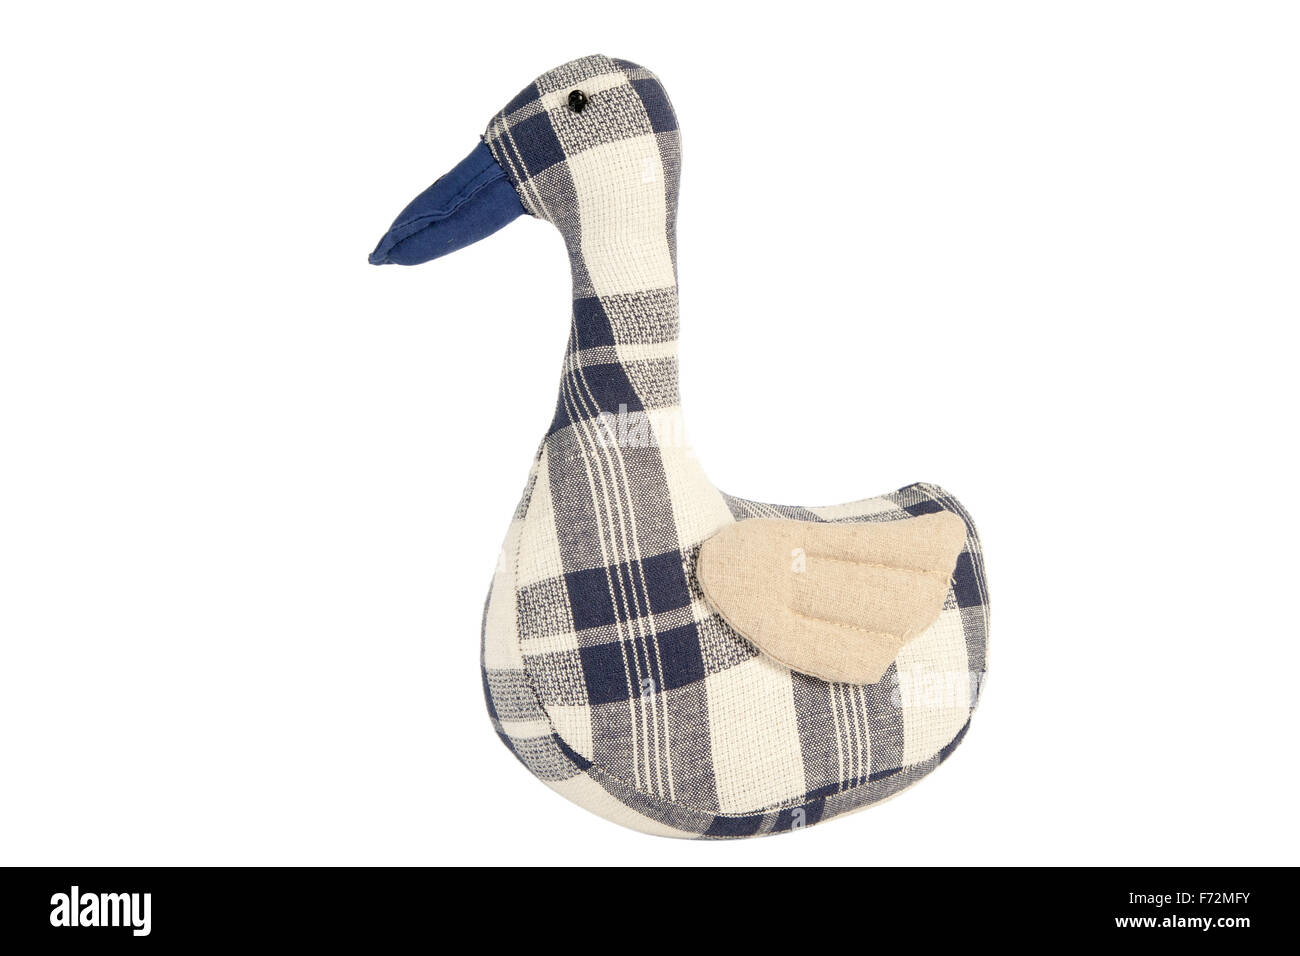 duck toy isolated on white, Pattern Fabric Stock Photo